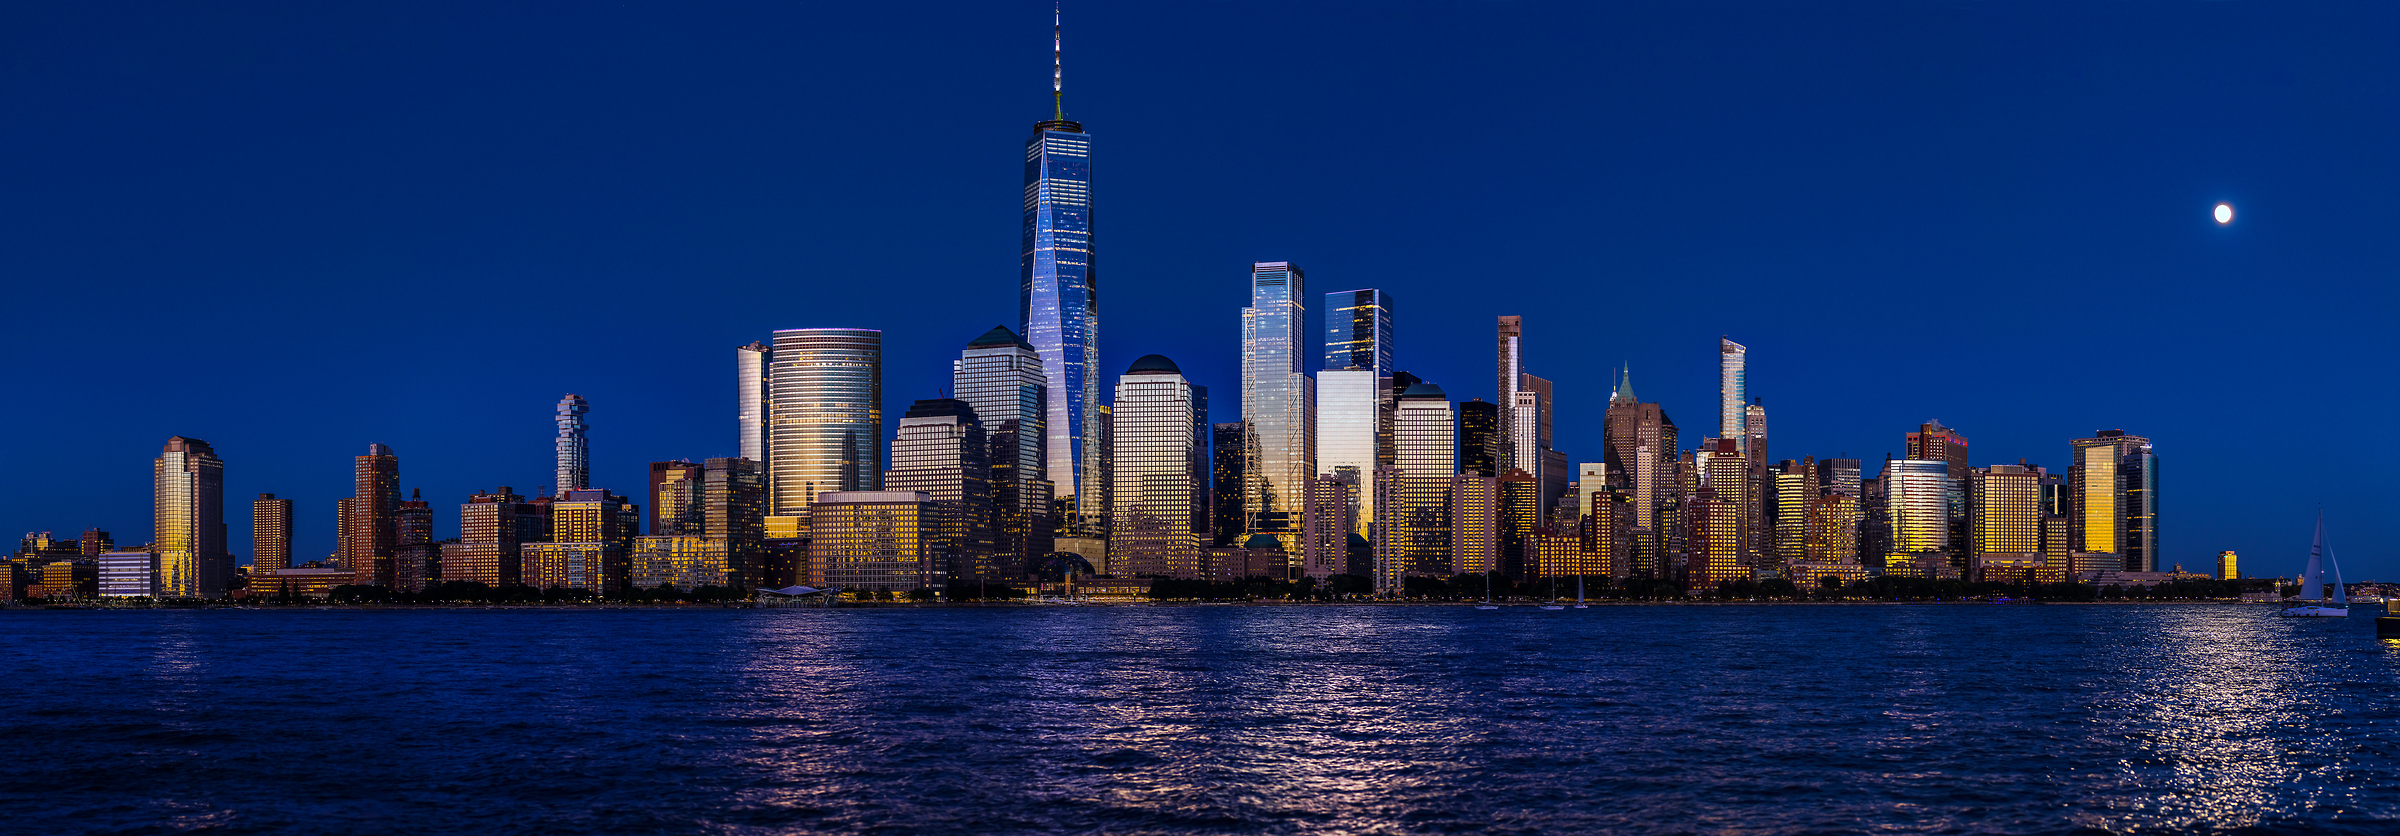 323 megapixels! A very high resolution, large-format VAST photo print of the Lower Manhattan skyline at sunset with a dark blue sky; cityscape photograph created by Beyti Barbaros in Lower Manhattan, New York City, New York